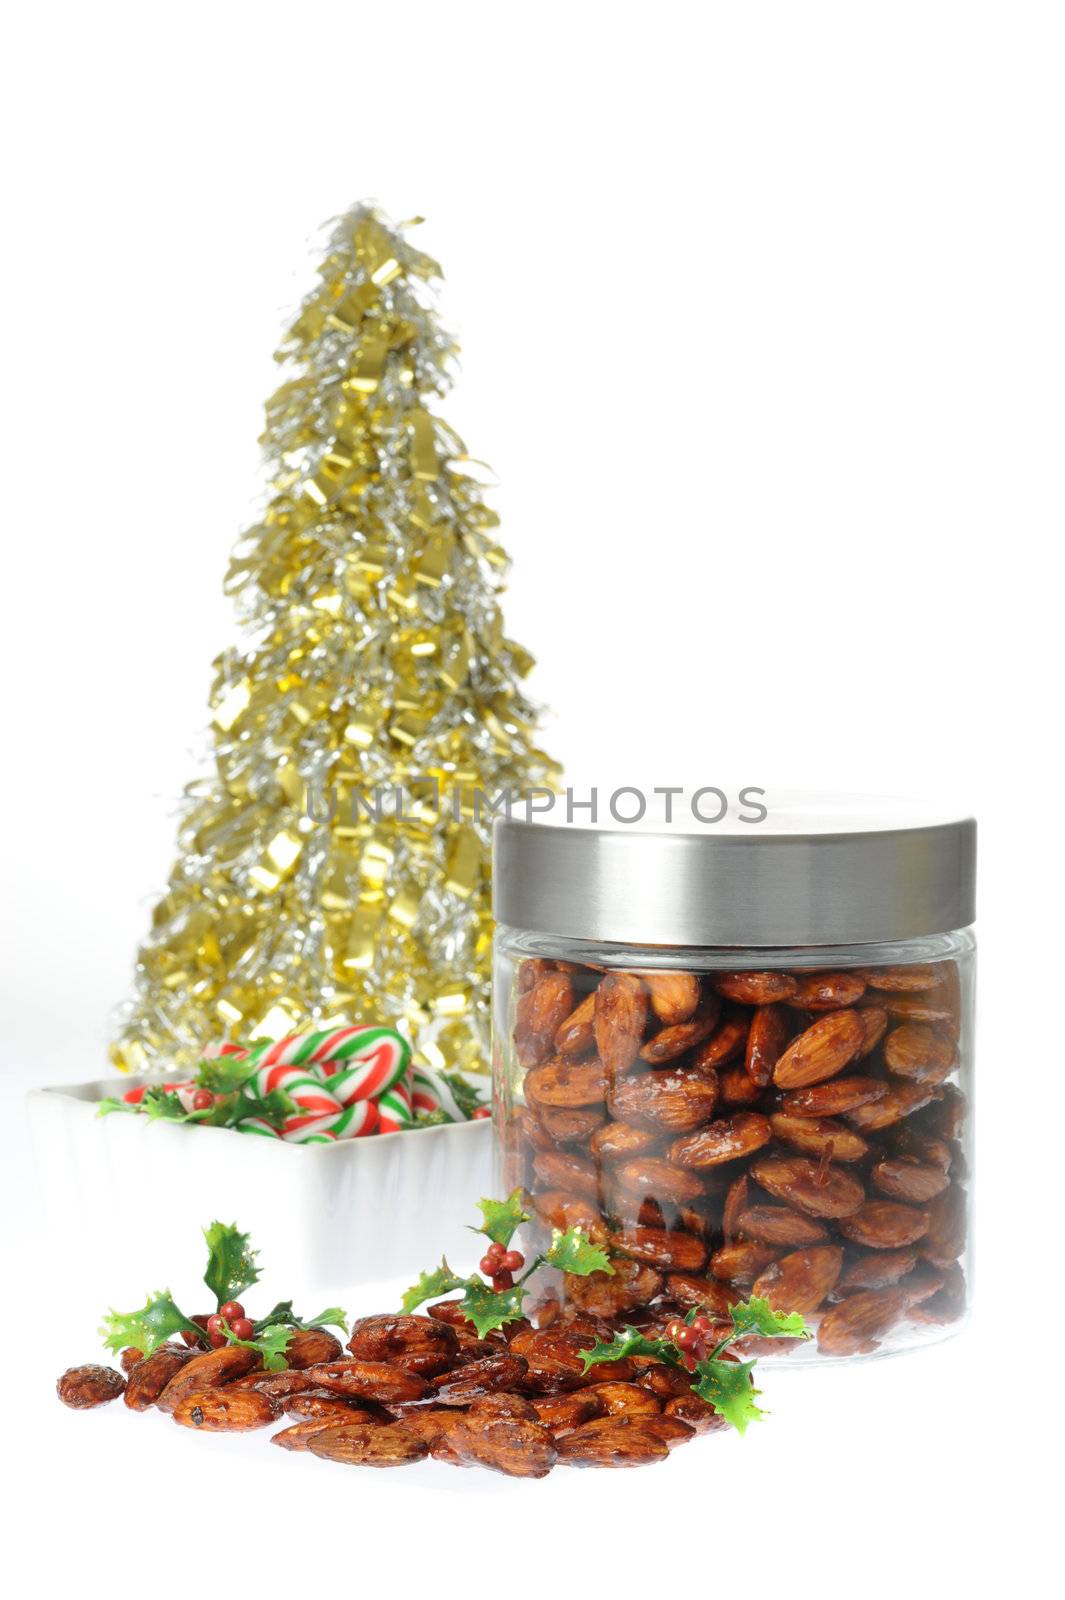 Spicy Candied Almonds by billberryphotography